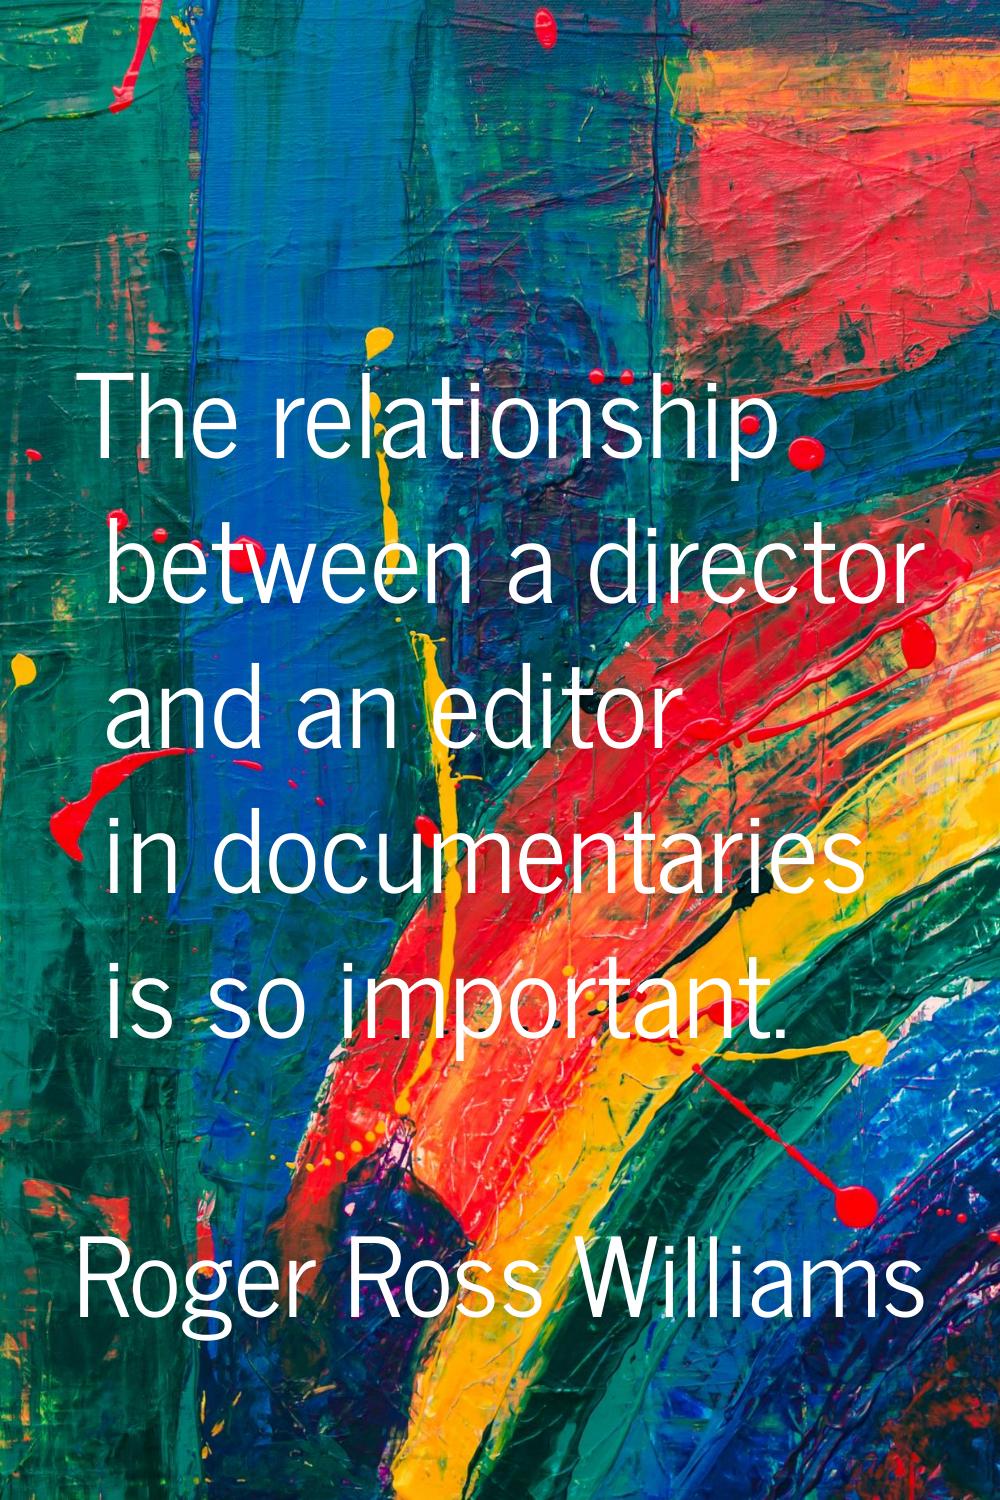 The relationship between a director and an editor in documentaries is so important.